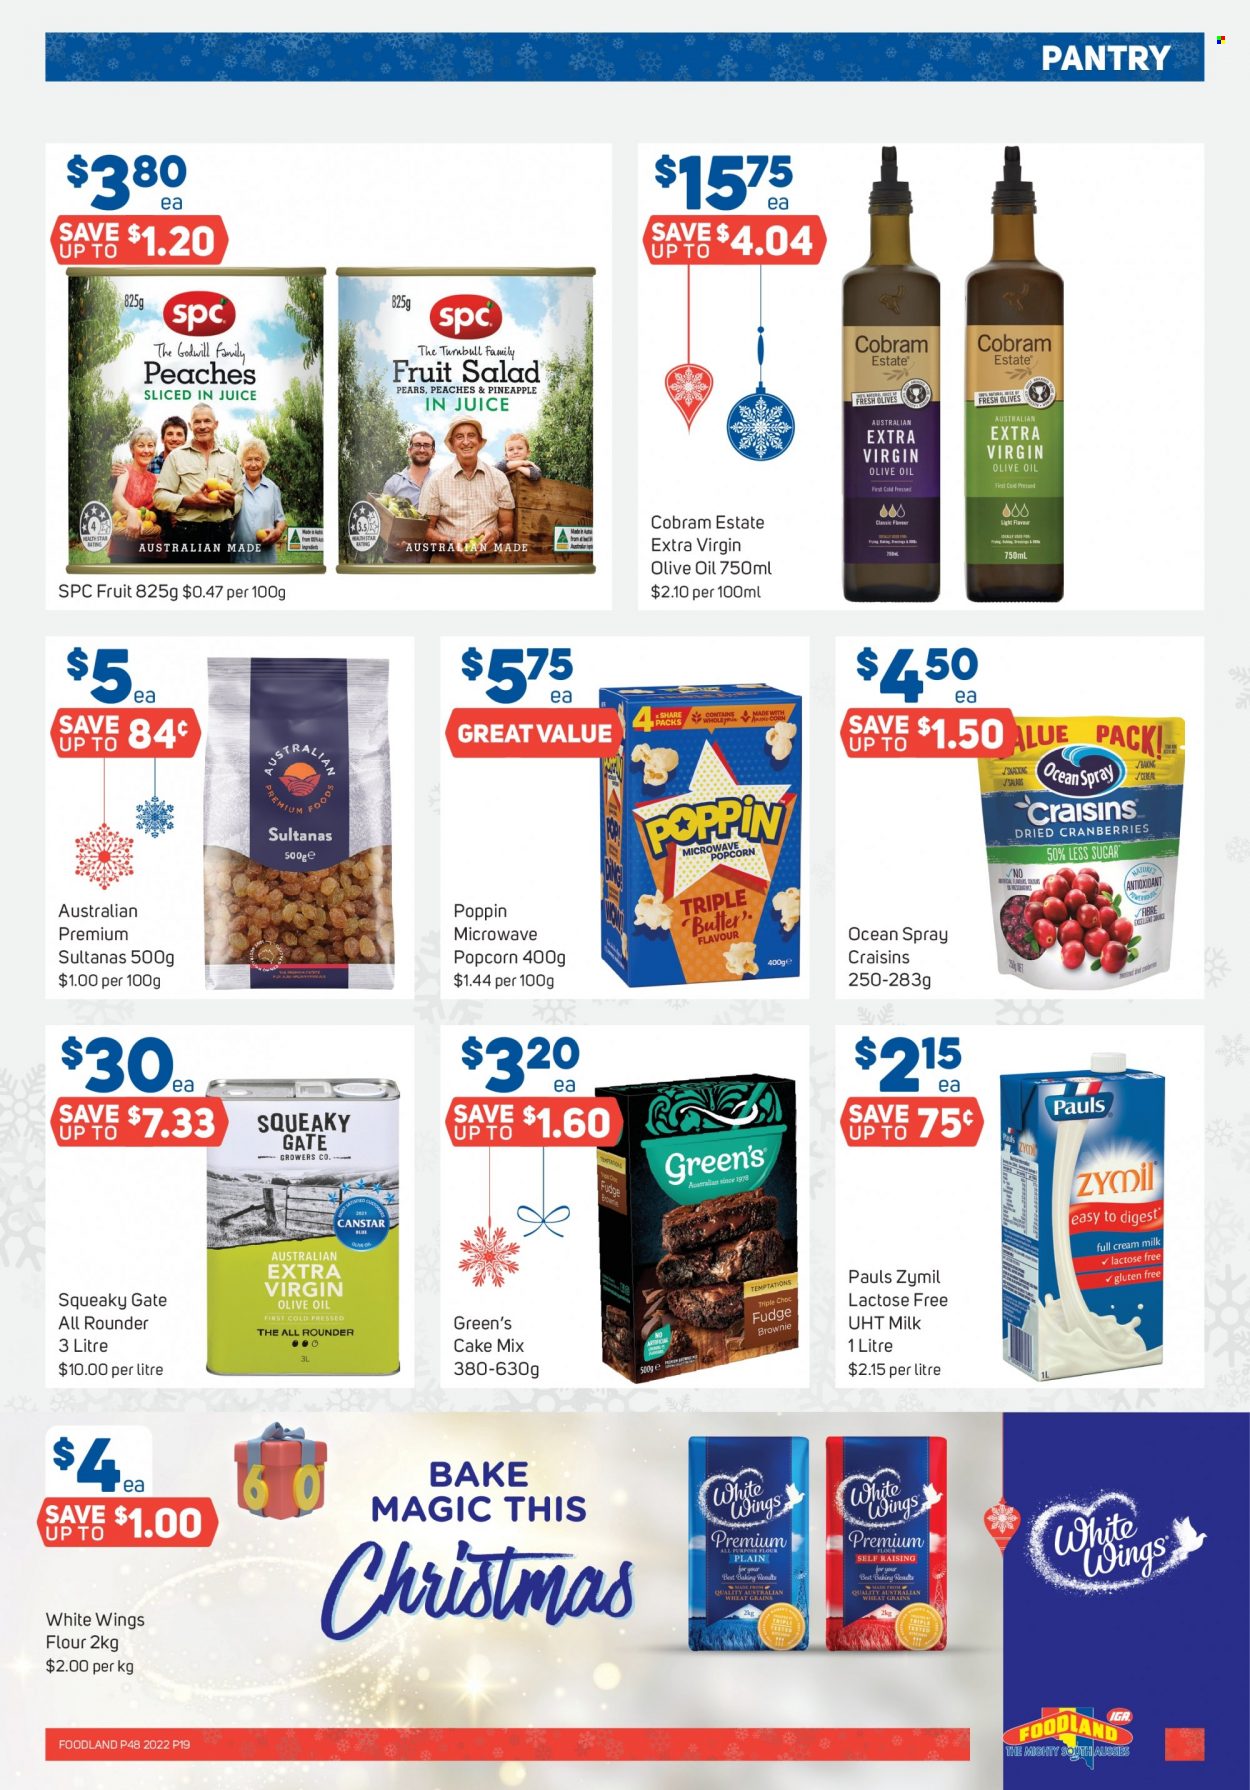 thumbnail - Foodland Catalogue - 30 Nov 2022 - 6 Dec 2022 - Sales products - brownies, cake mix, White Wings, corn, pineapple, pears, peaches, butter, fudge, popcorn, all purpose flour, flour, craisins, cranberries, olives, fruit salad, cereals, extra virgin olive oil, olive oil, oil, dried fruit, juice, Aussie. Page 19.